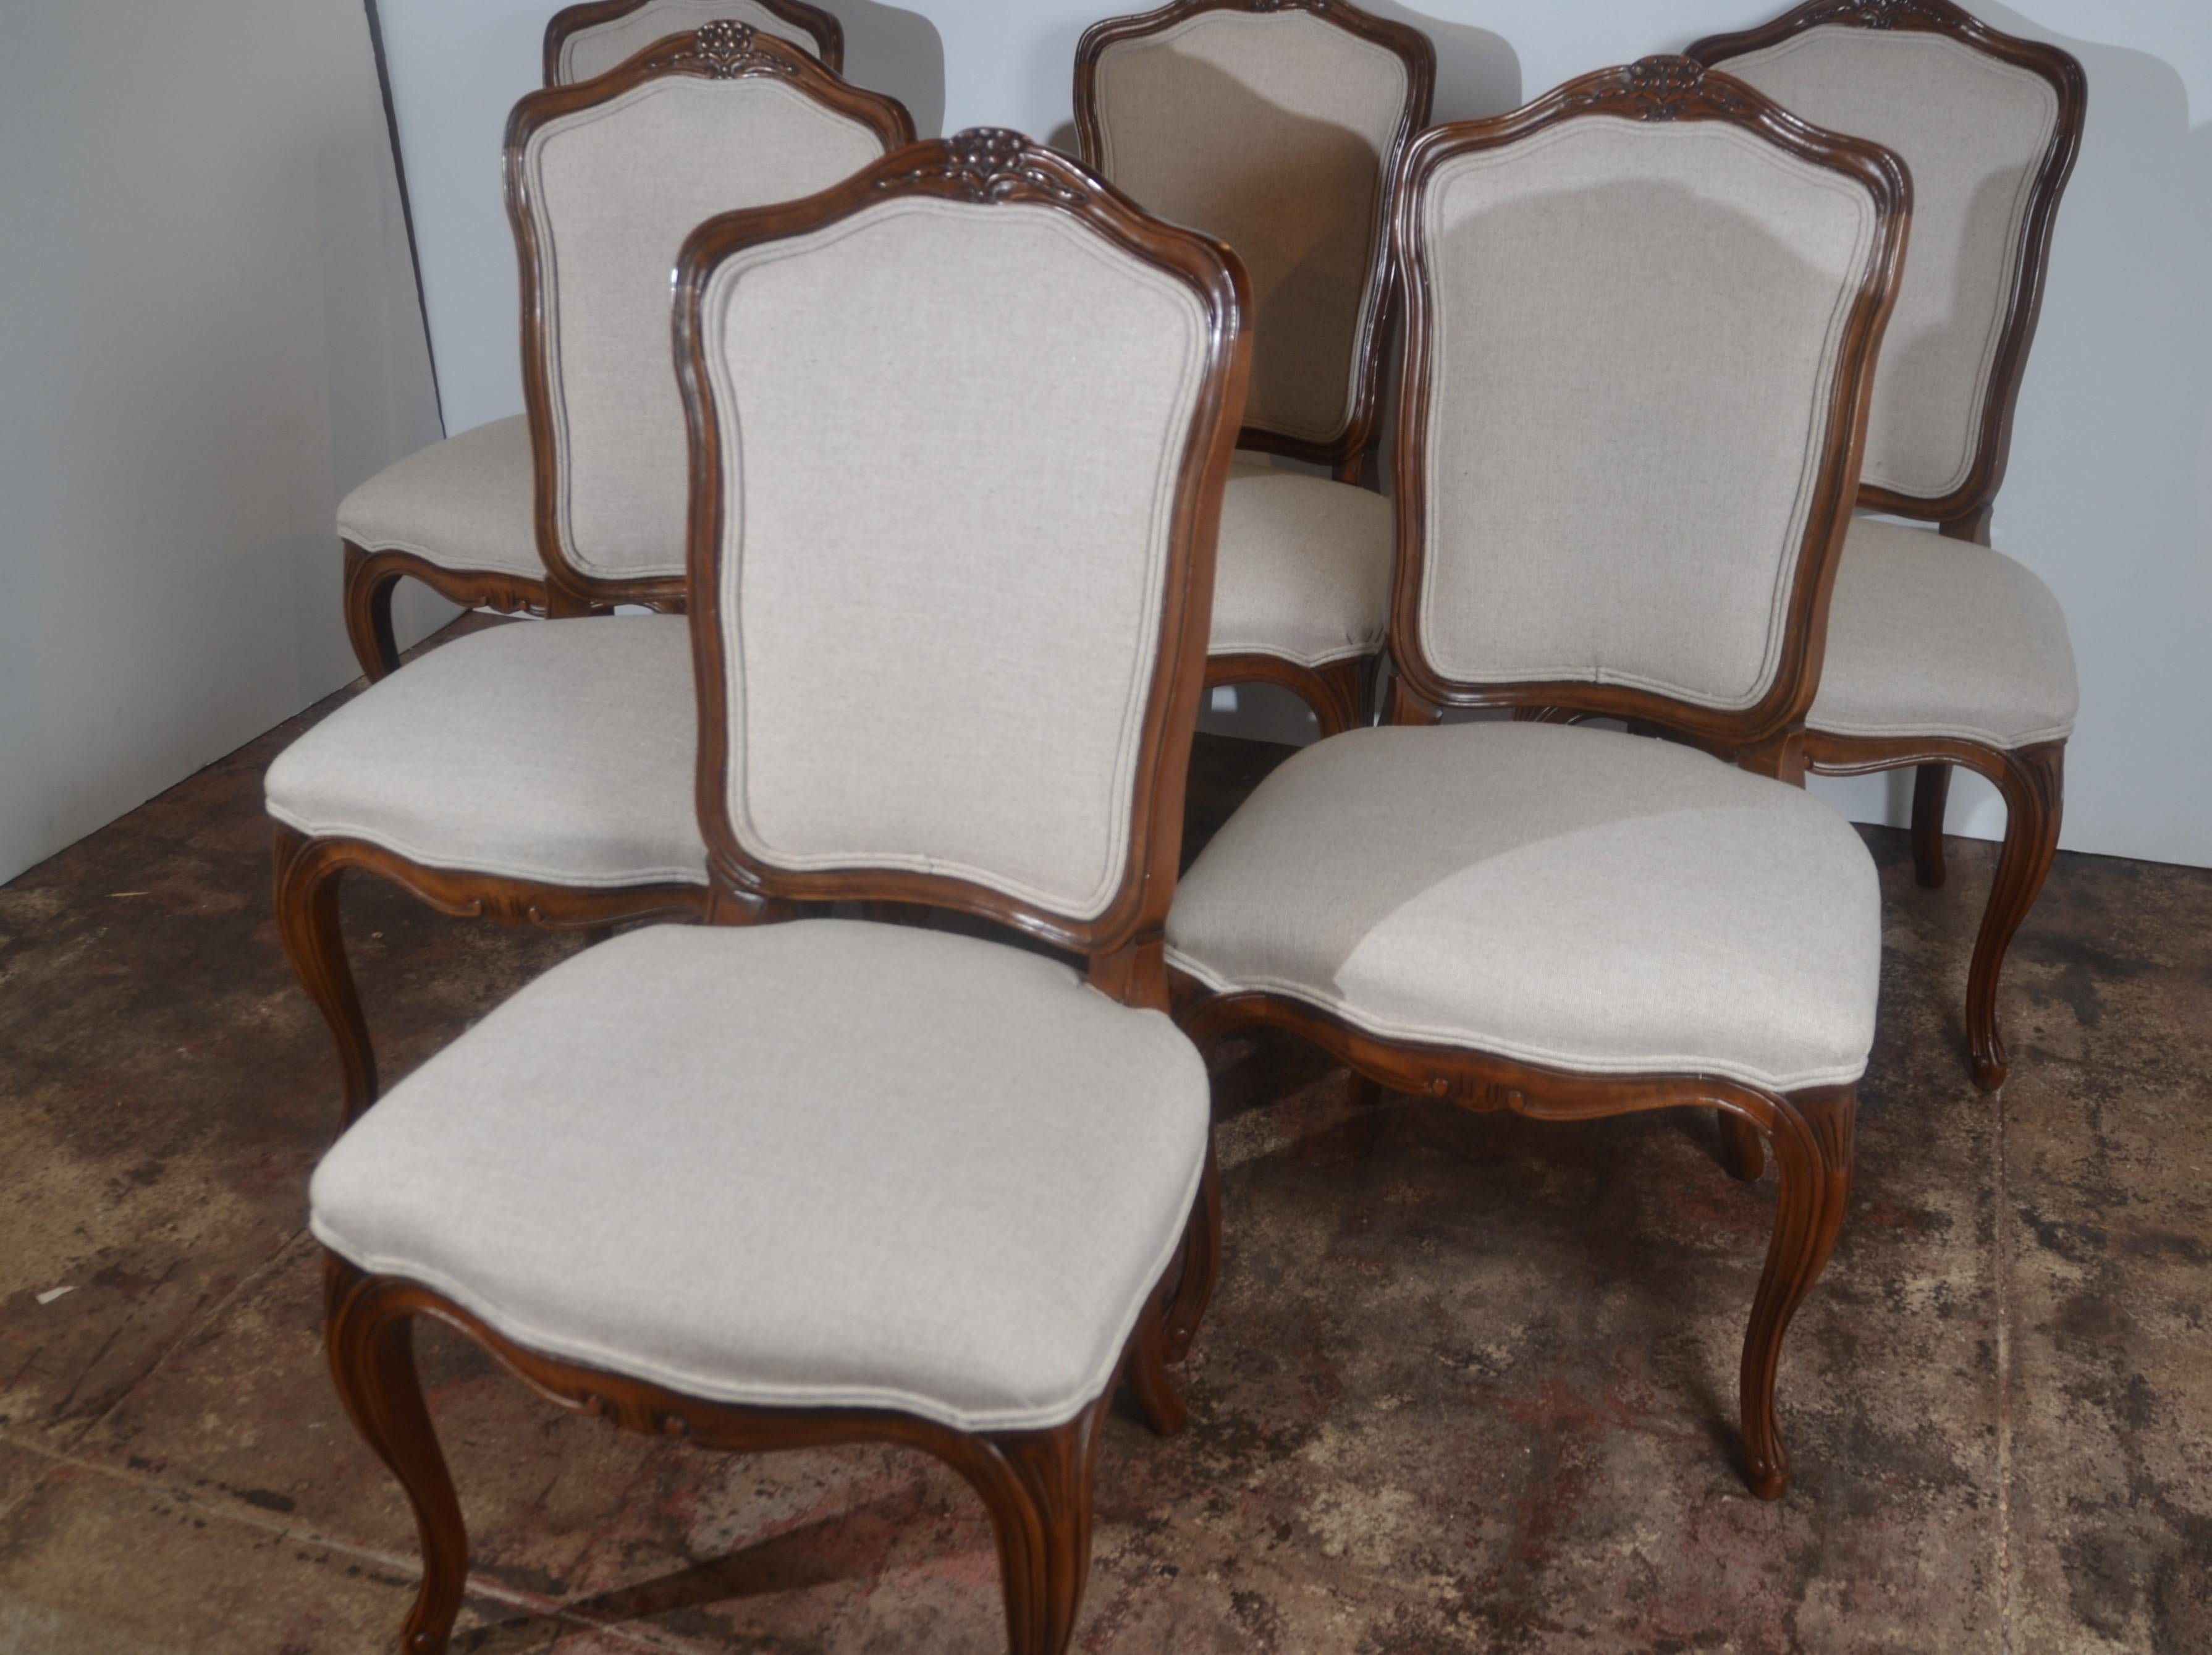 Louis xv style set of six dining chairs by Kindel. The chairs have been recovered in linen.